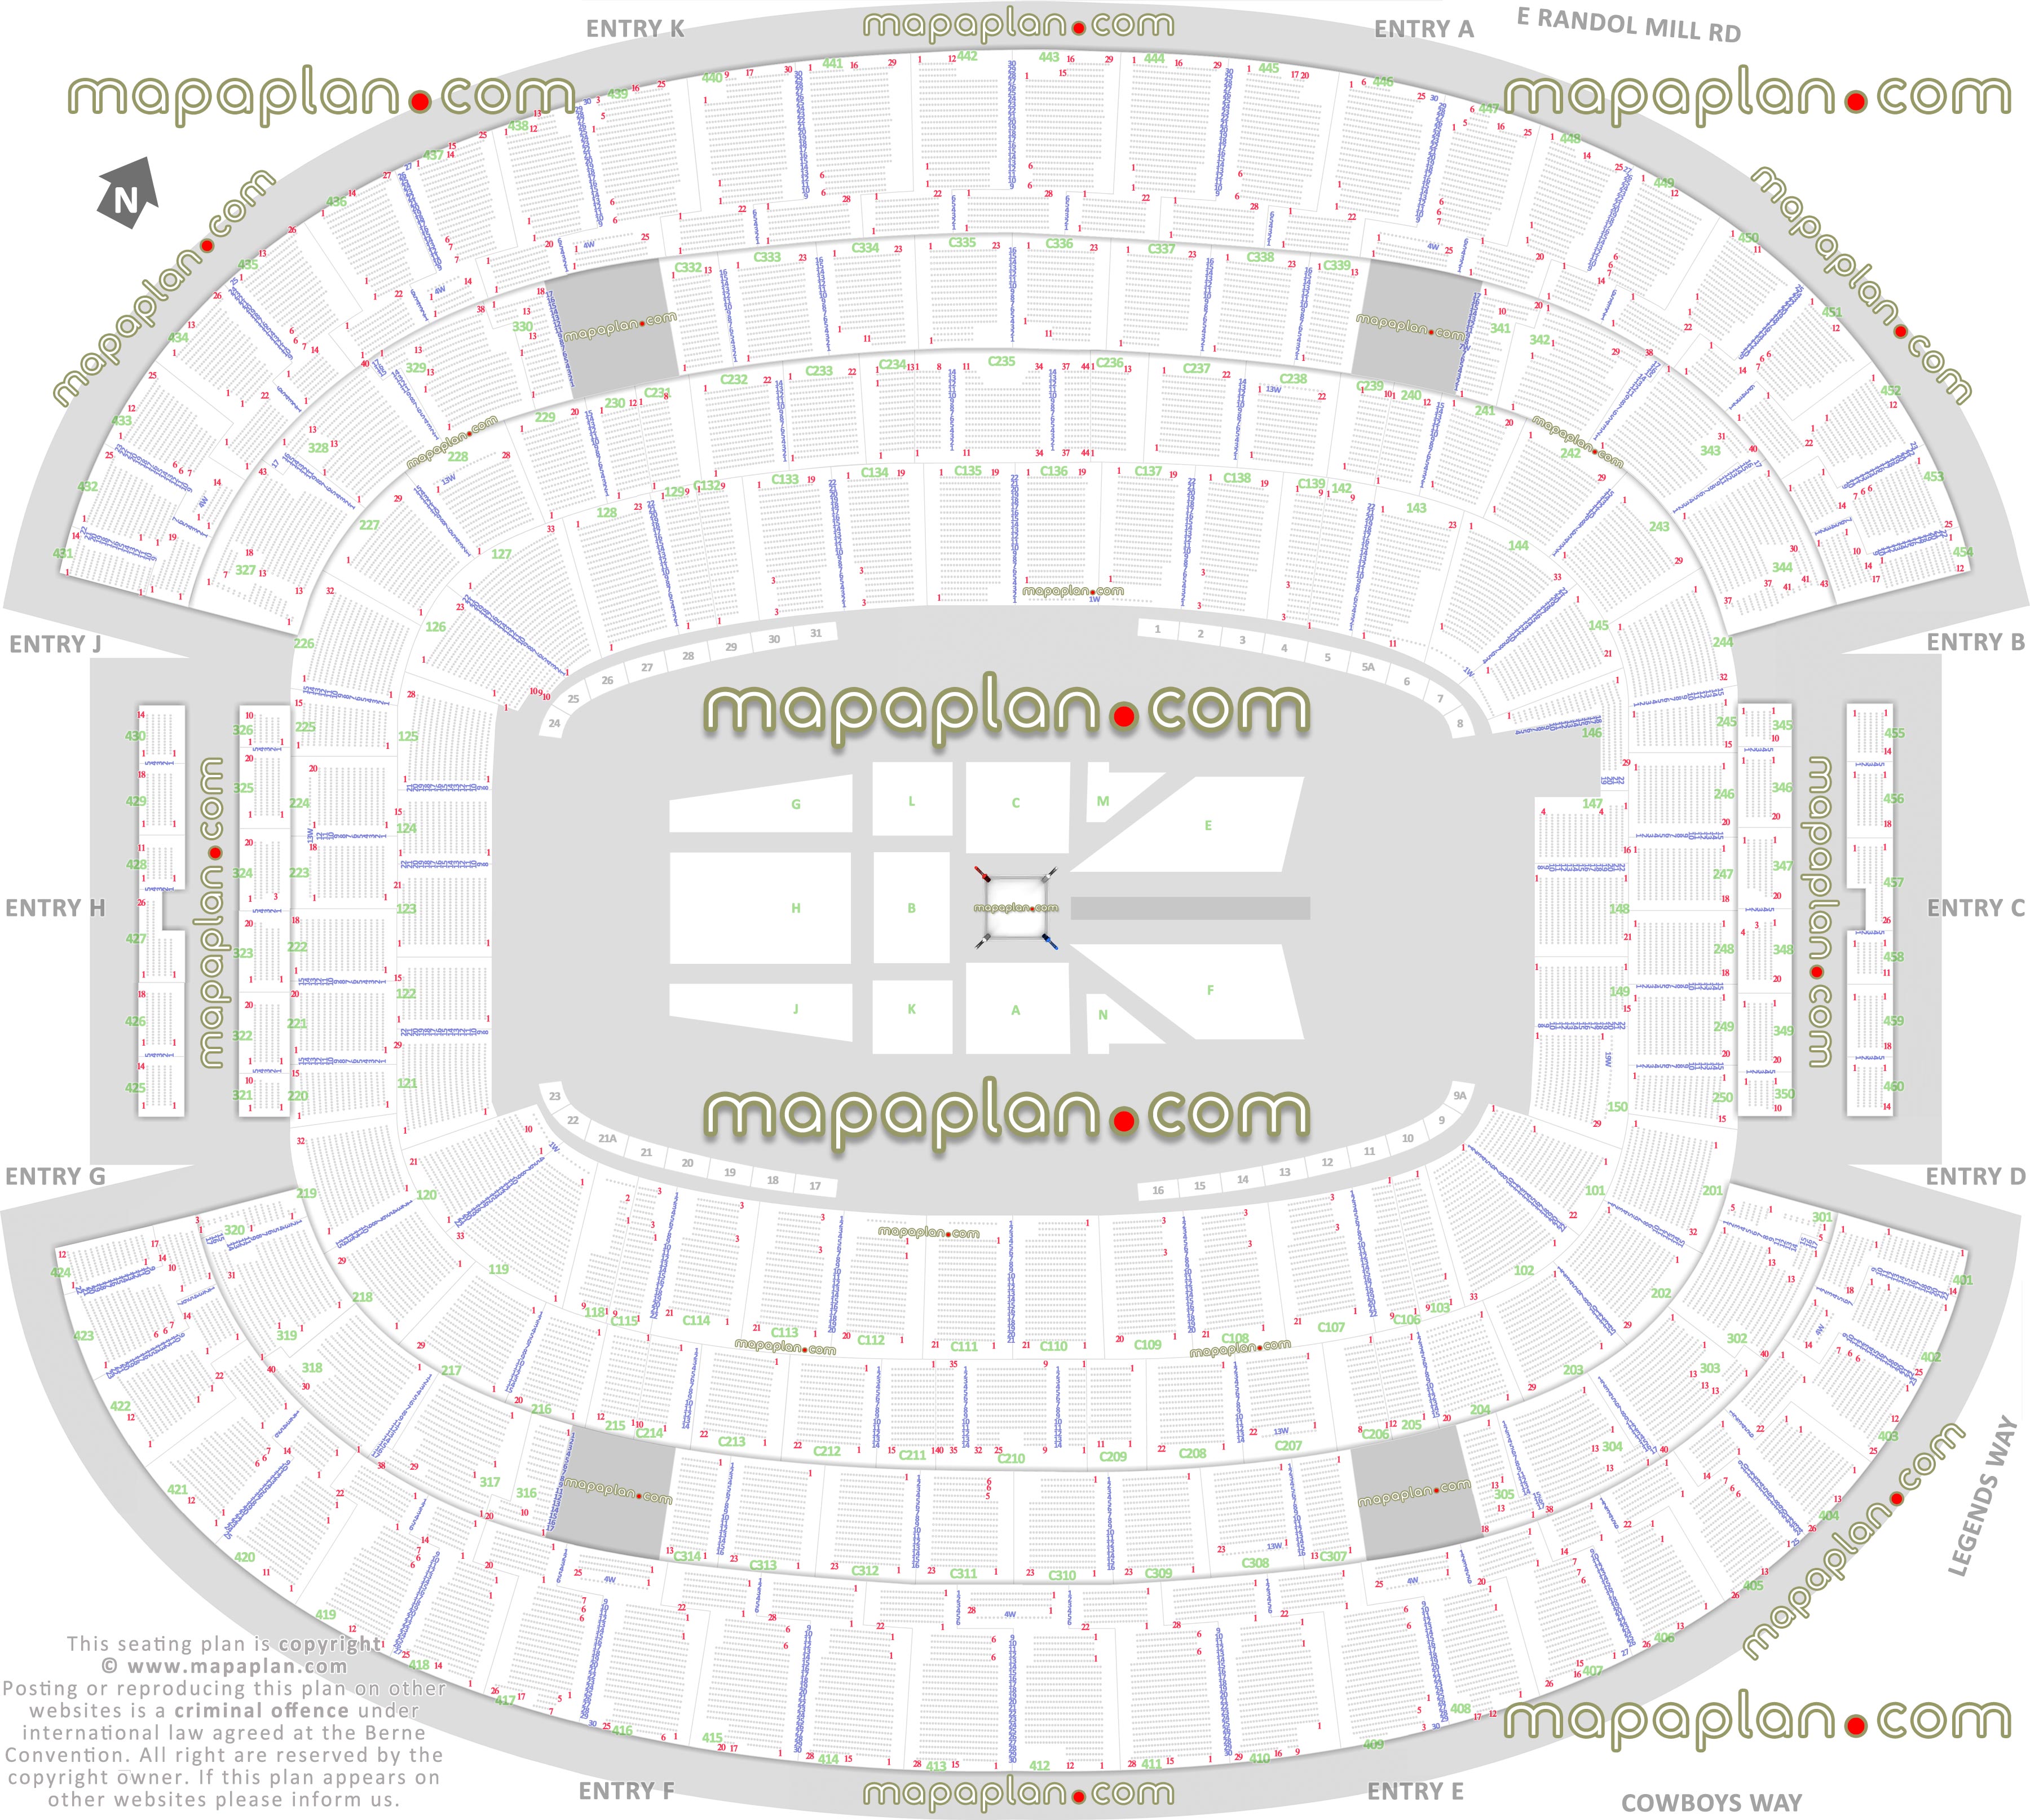 wwe wrestlemania raw smackdown wrestling boxing match events dallas cowboys stadium texas map row numbers 360 round ring floor configuration diagram rows hall fame main mezzanine upper concourse sections 401 402 403 404 405 406 407 408 409 410 411 412 413 414 415 416 417 418 419 420 421 422 423 424 425 426 427 428 429 430 431 432 433 434 435 436 437 438 439 440 441 442 443 444 445 446 447 448 449 450 Dallas Cowboys AT&T Stadium seating chart